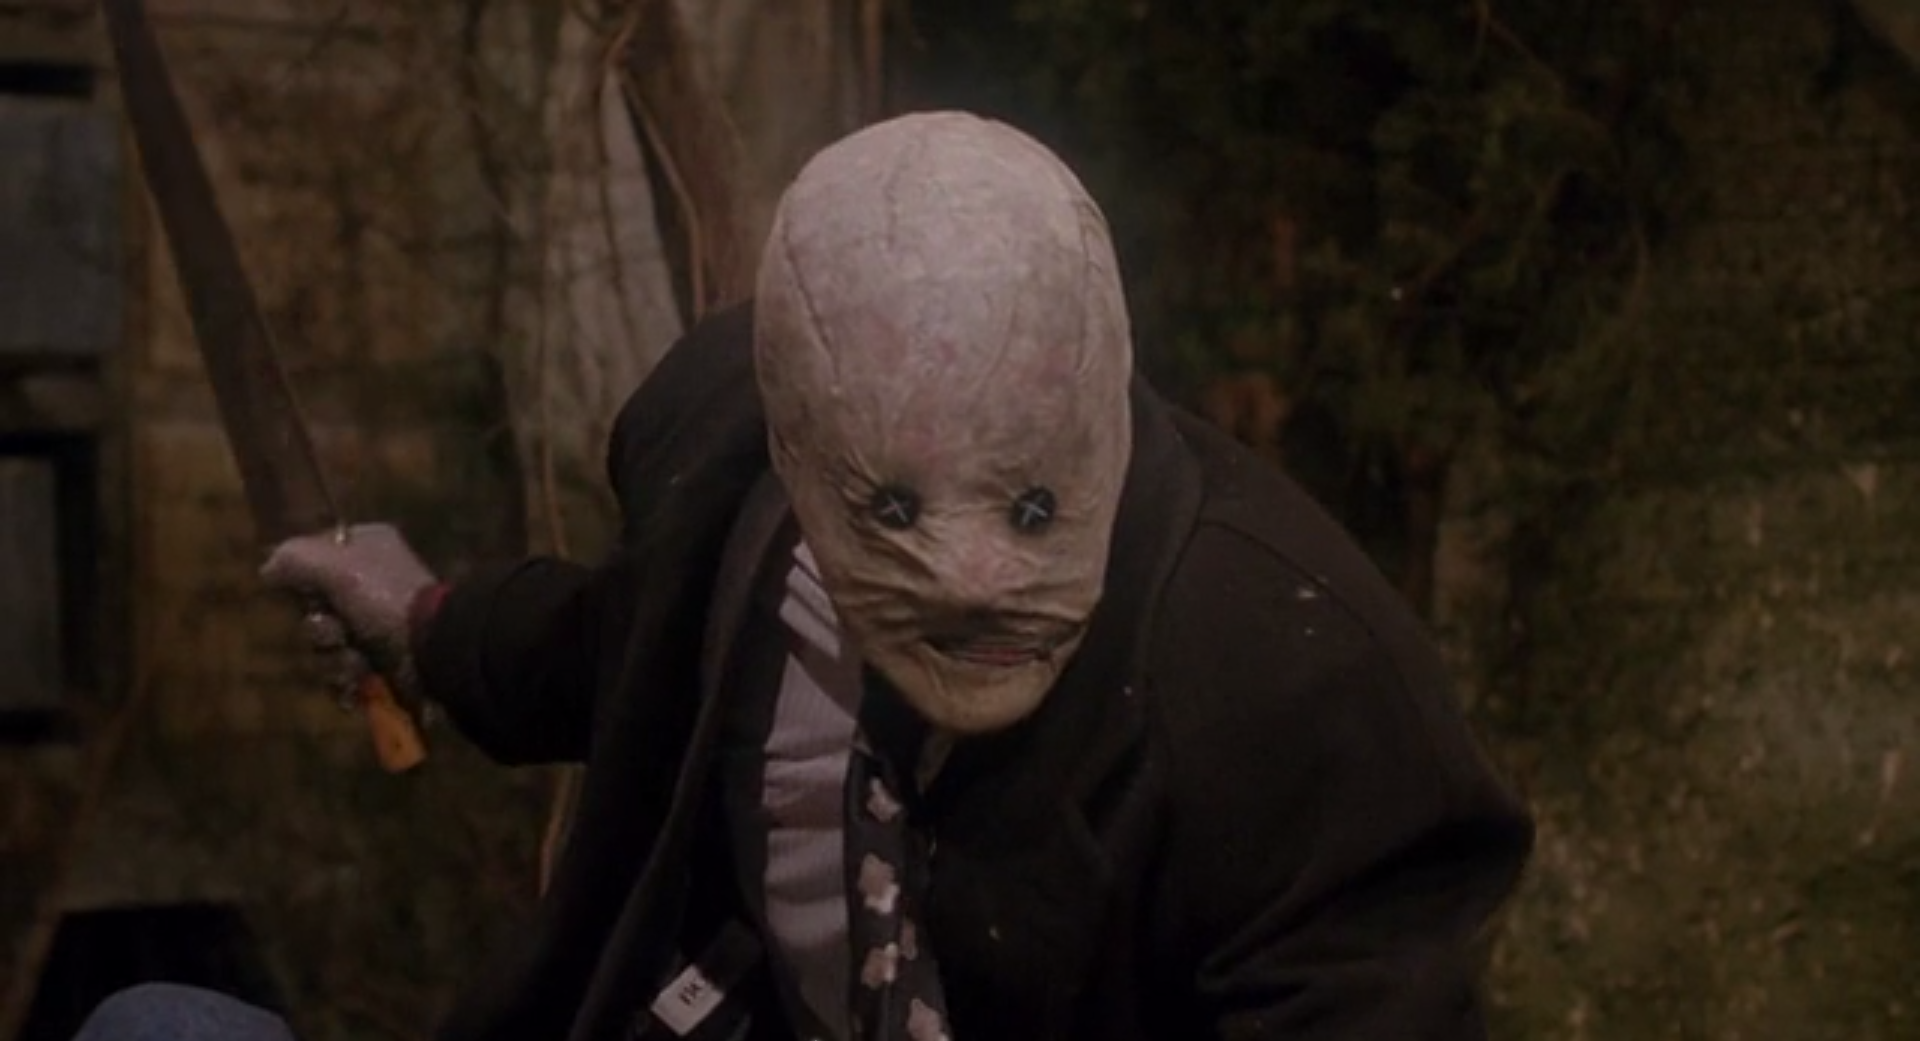 A man swings a large knife, wearing a mask that fits his face closely and has buttons sewn over the eyes.